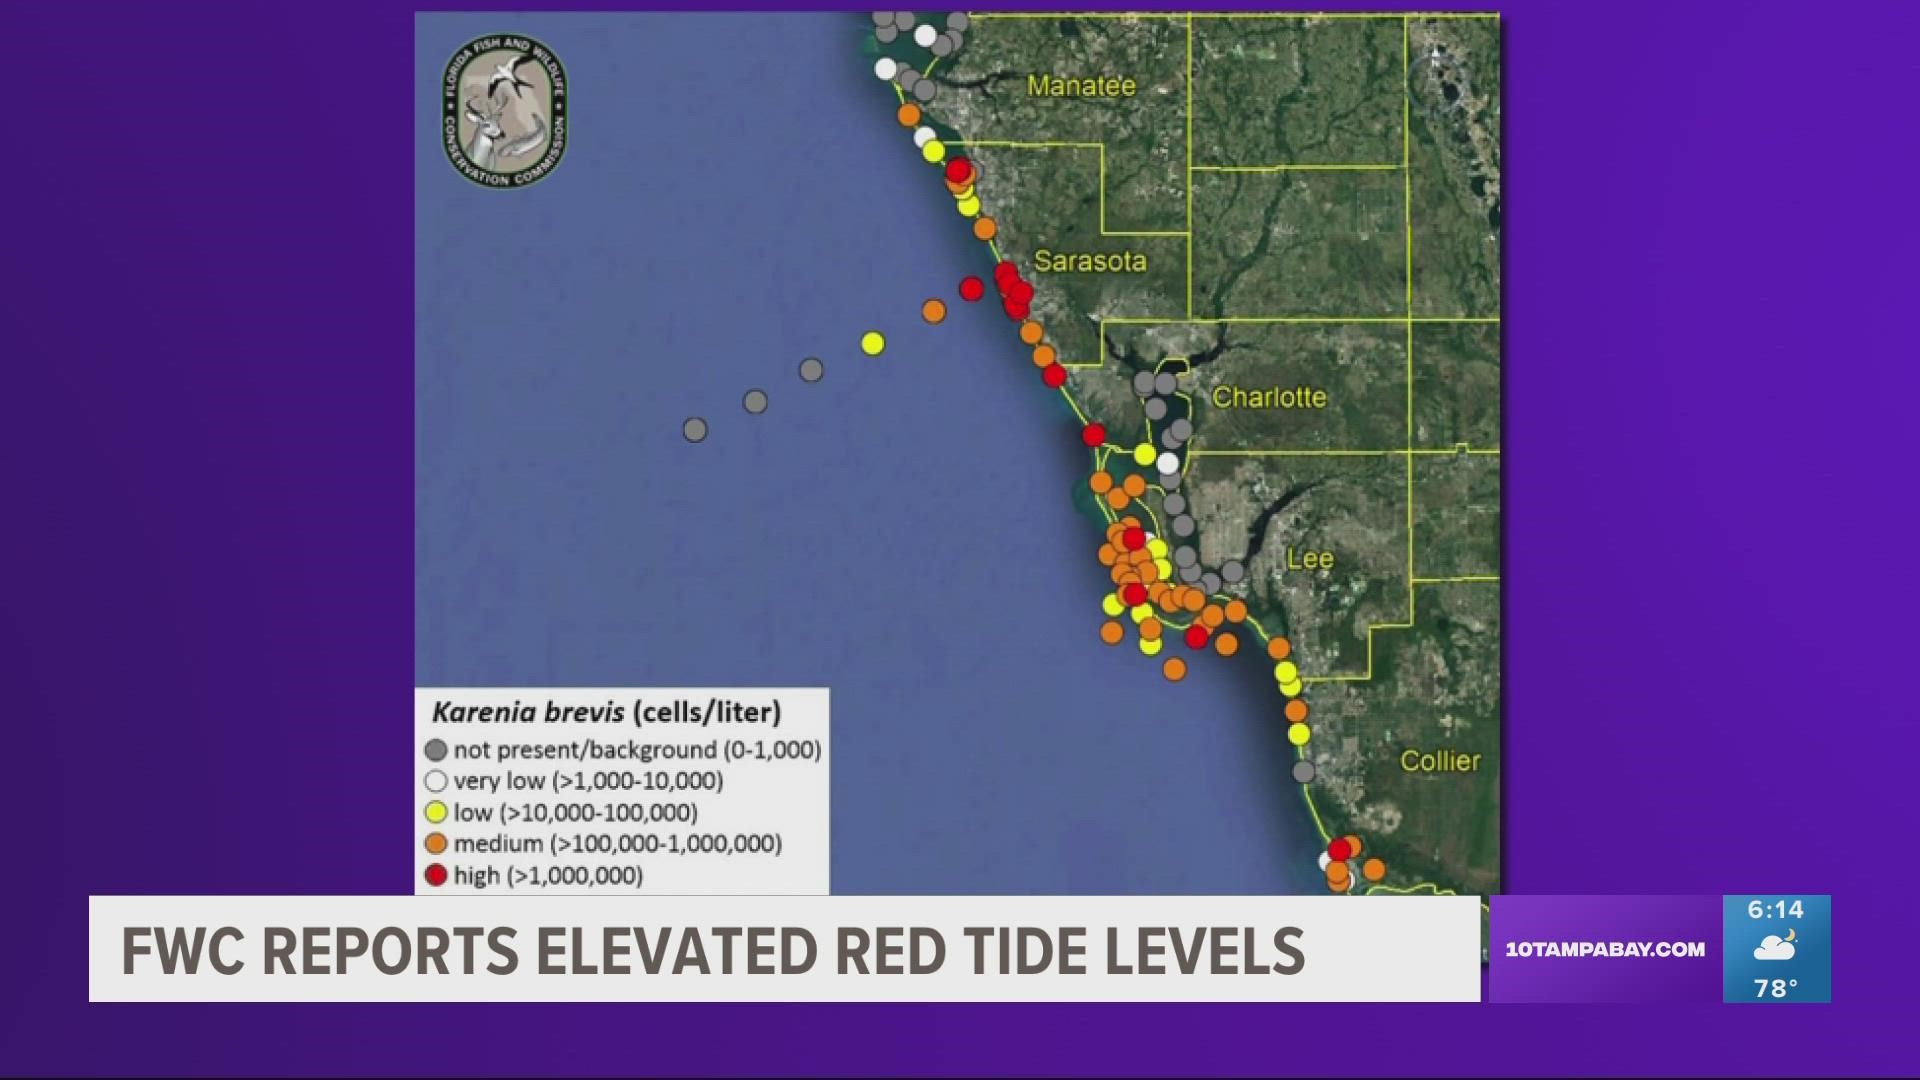 Sarasota County also reported fish kills related to the red tide bloom last week, FWC says.